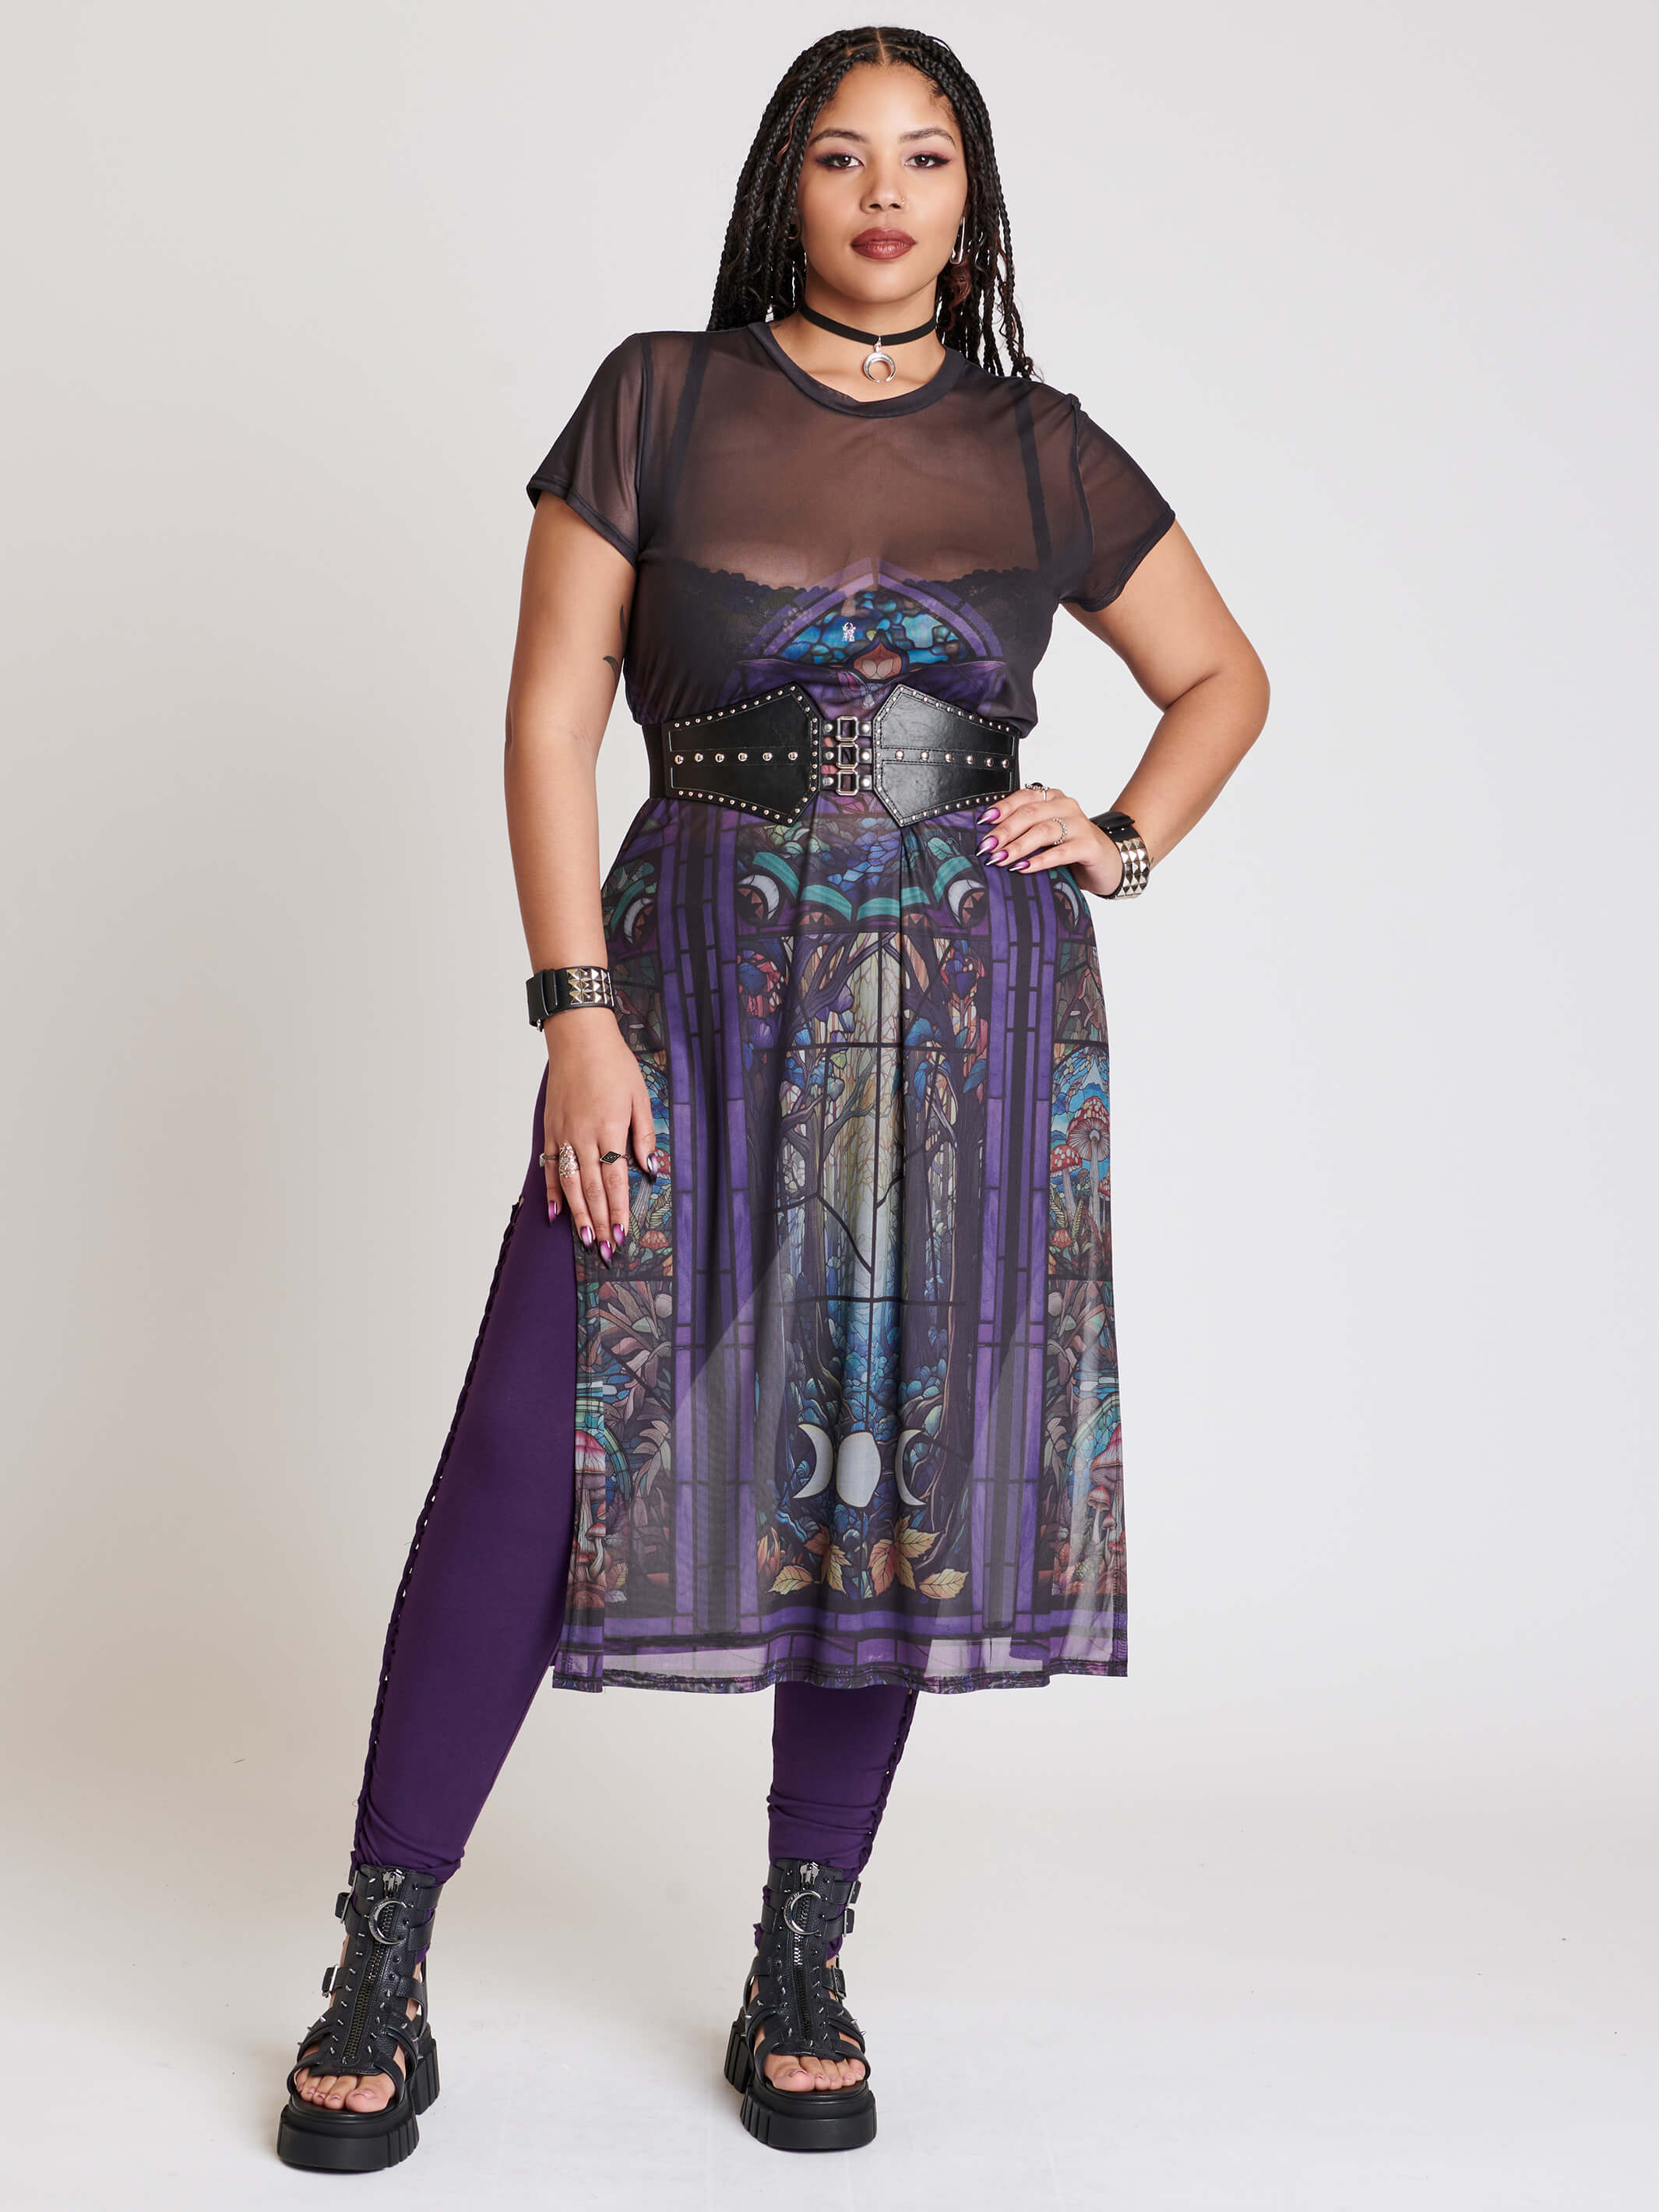 Plus Size Gothic Clothing – The Mystery Of The Dark!  Plus size outfits,  Best plus size dresses, Plus size fashion